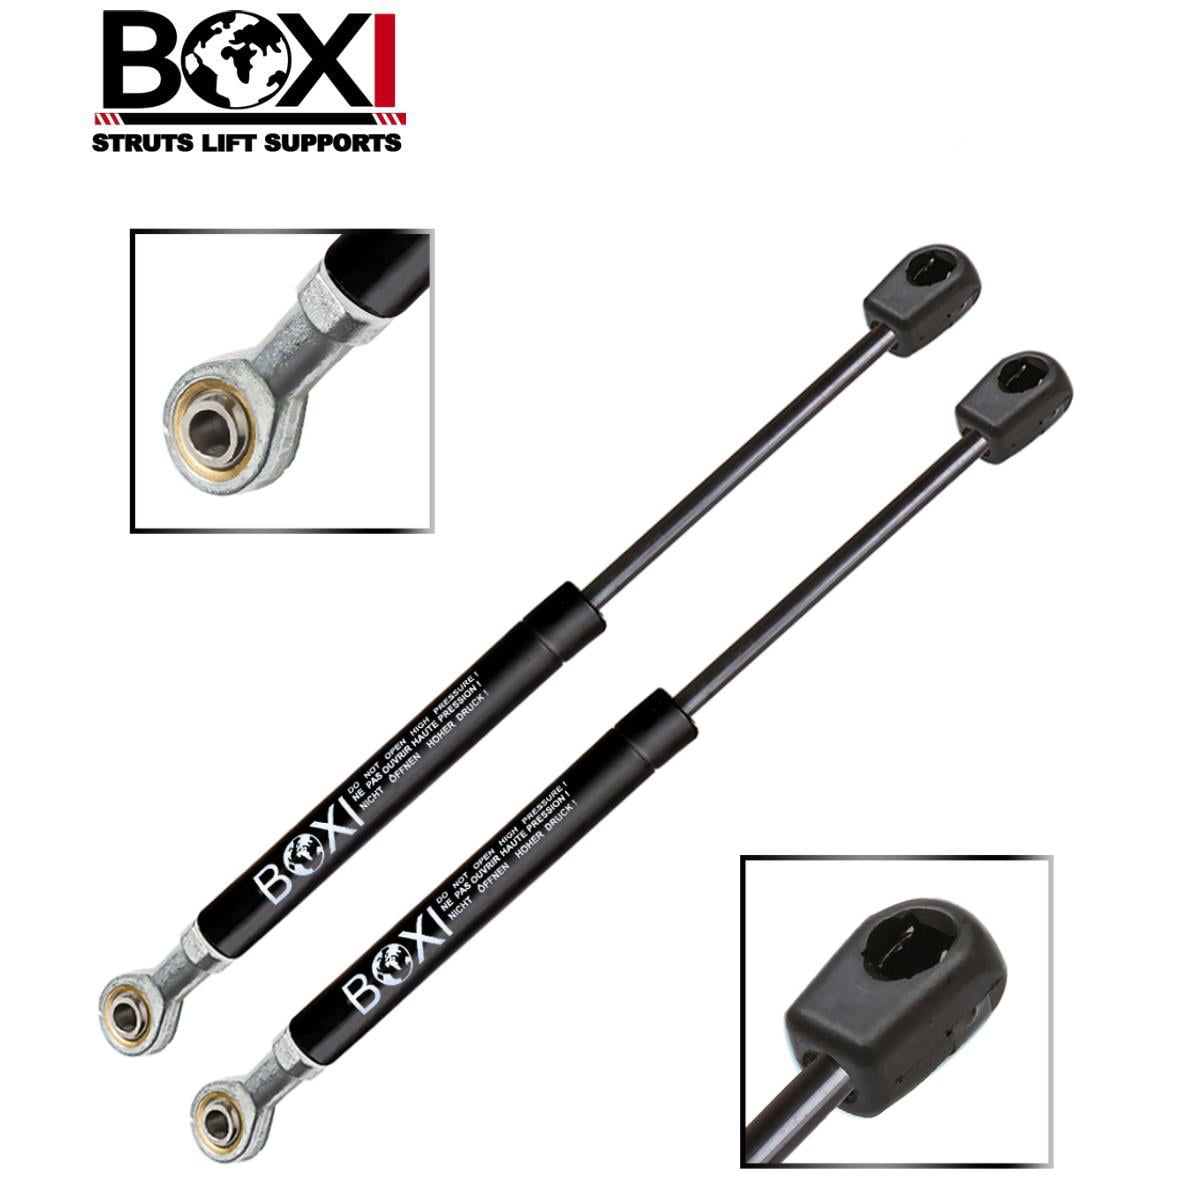 Note: 19.84 IN 2Pcs Rear Back WINDOW GLASS Struts Lift Supports Shock Gas Spring Prop Rod Compatible With 07-14 ESCALADE ESV EXT/TAHOE/Suburban/YUKON/YUKON XL 1500 2500 